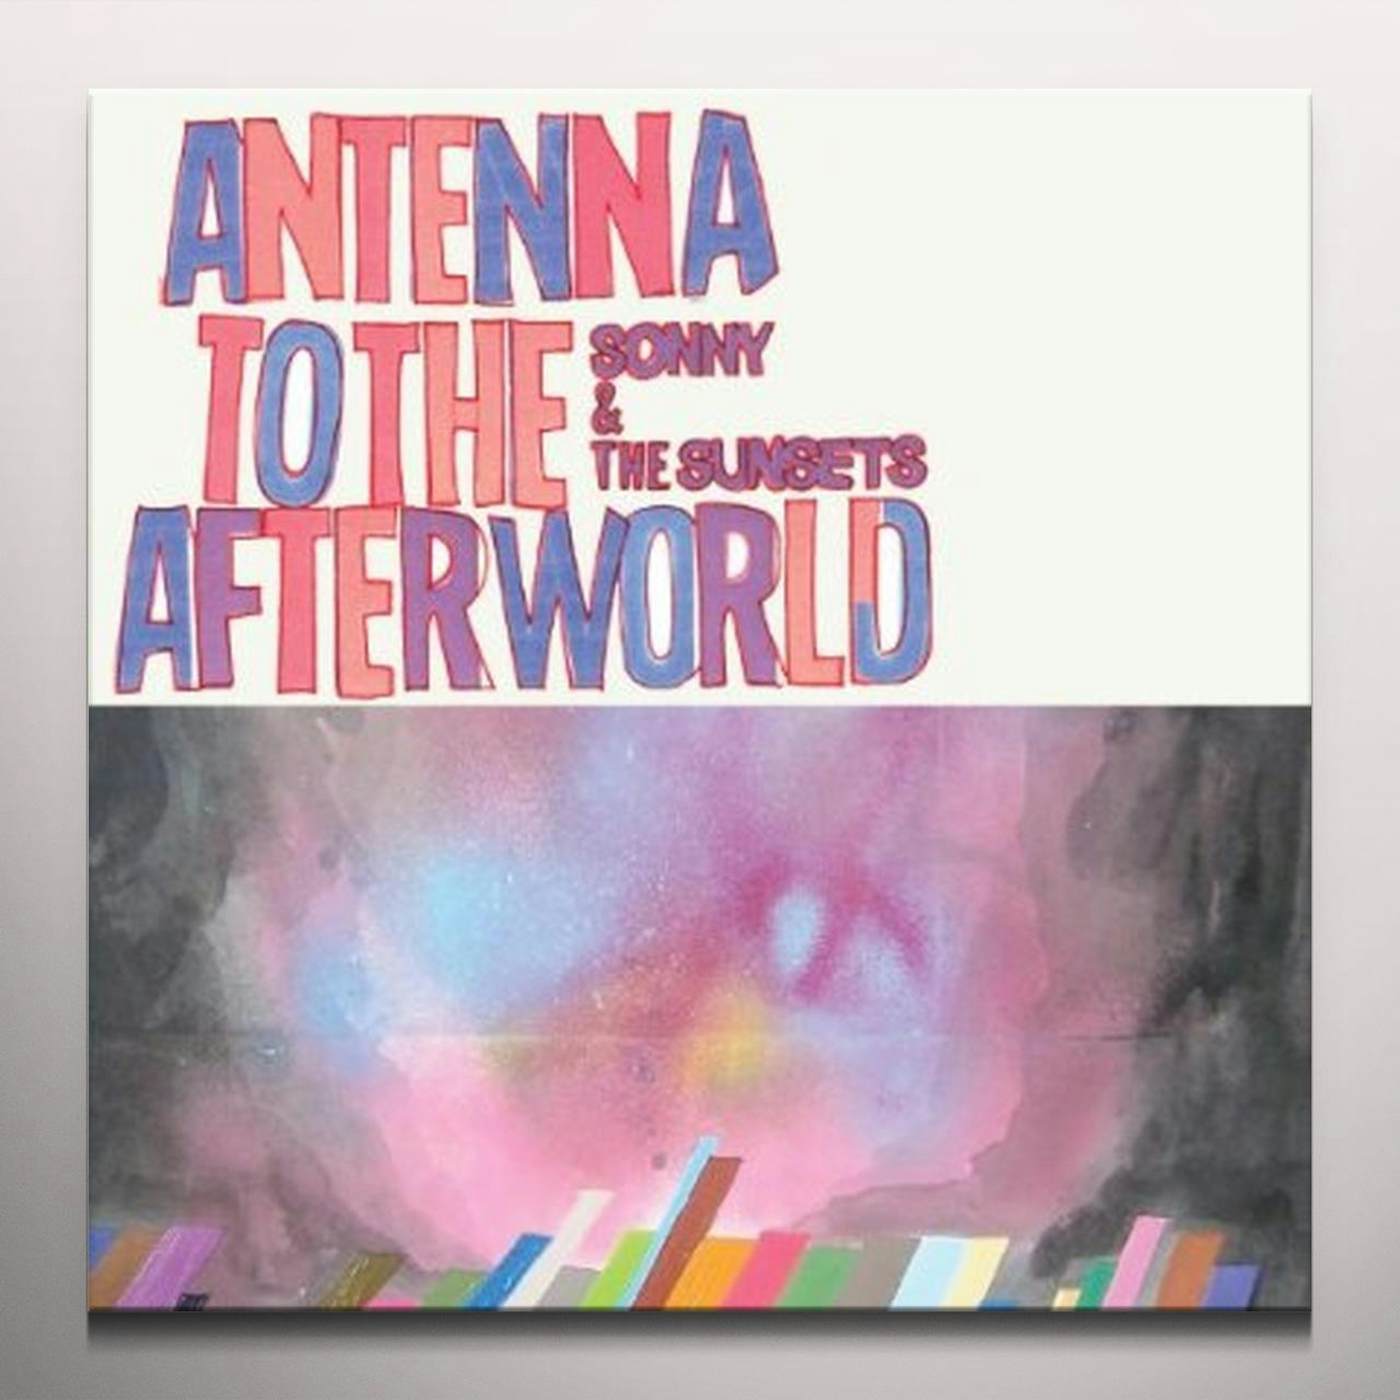 Sonny & The Sunsets Antenna To The Afterworld Vinyl Record